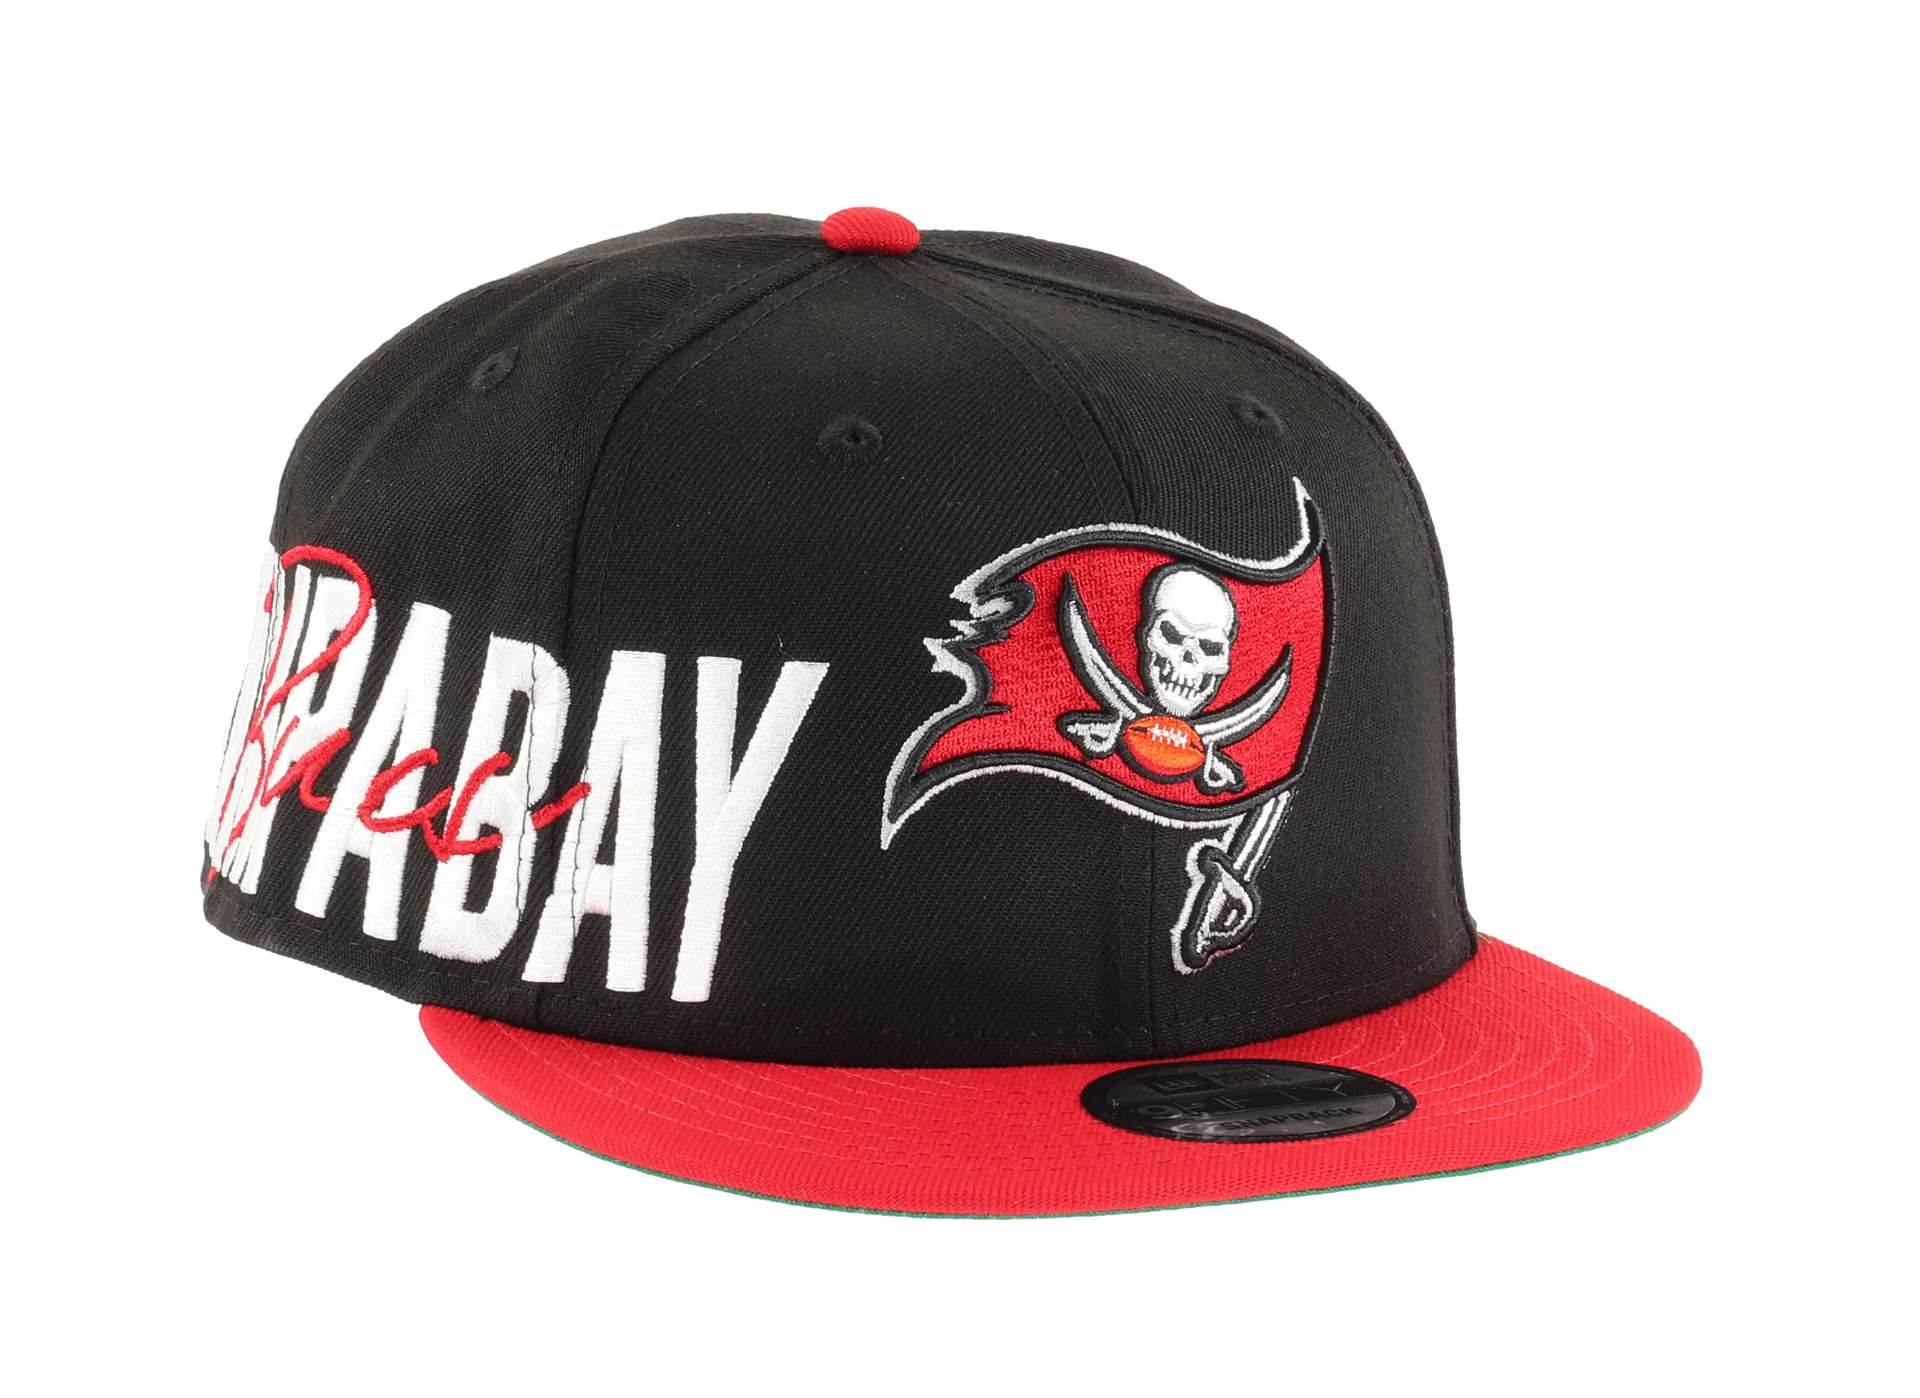 Tampa Bay Buccaneers Sidefont Black / Red 9Fifty Snapback Cap New Era